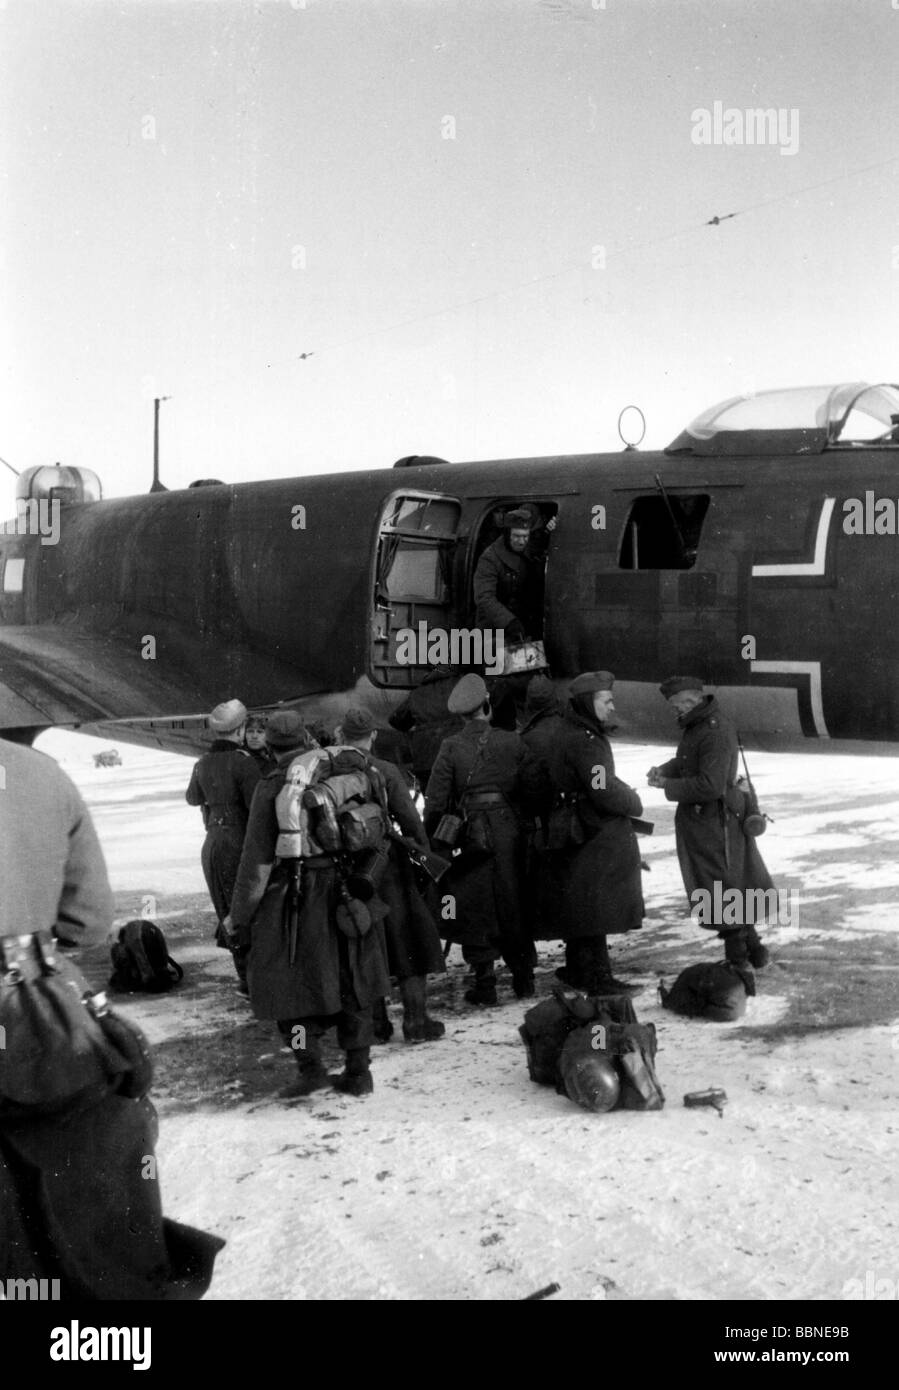 events, Second World War/WWII, Russia, 1942 / 1943, Kerch, Crimea, wounded German soldiers are evacuated with a transport plane Focke Wulf Fw 200 'Condor', 6.2.1943, Stock Photo